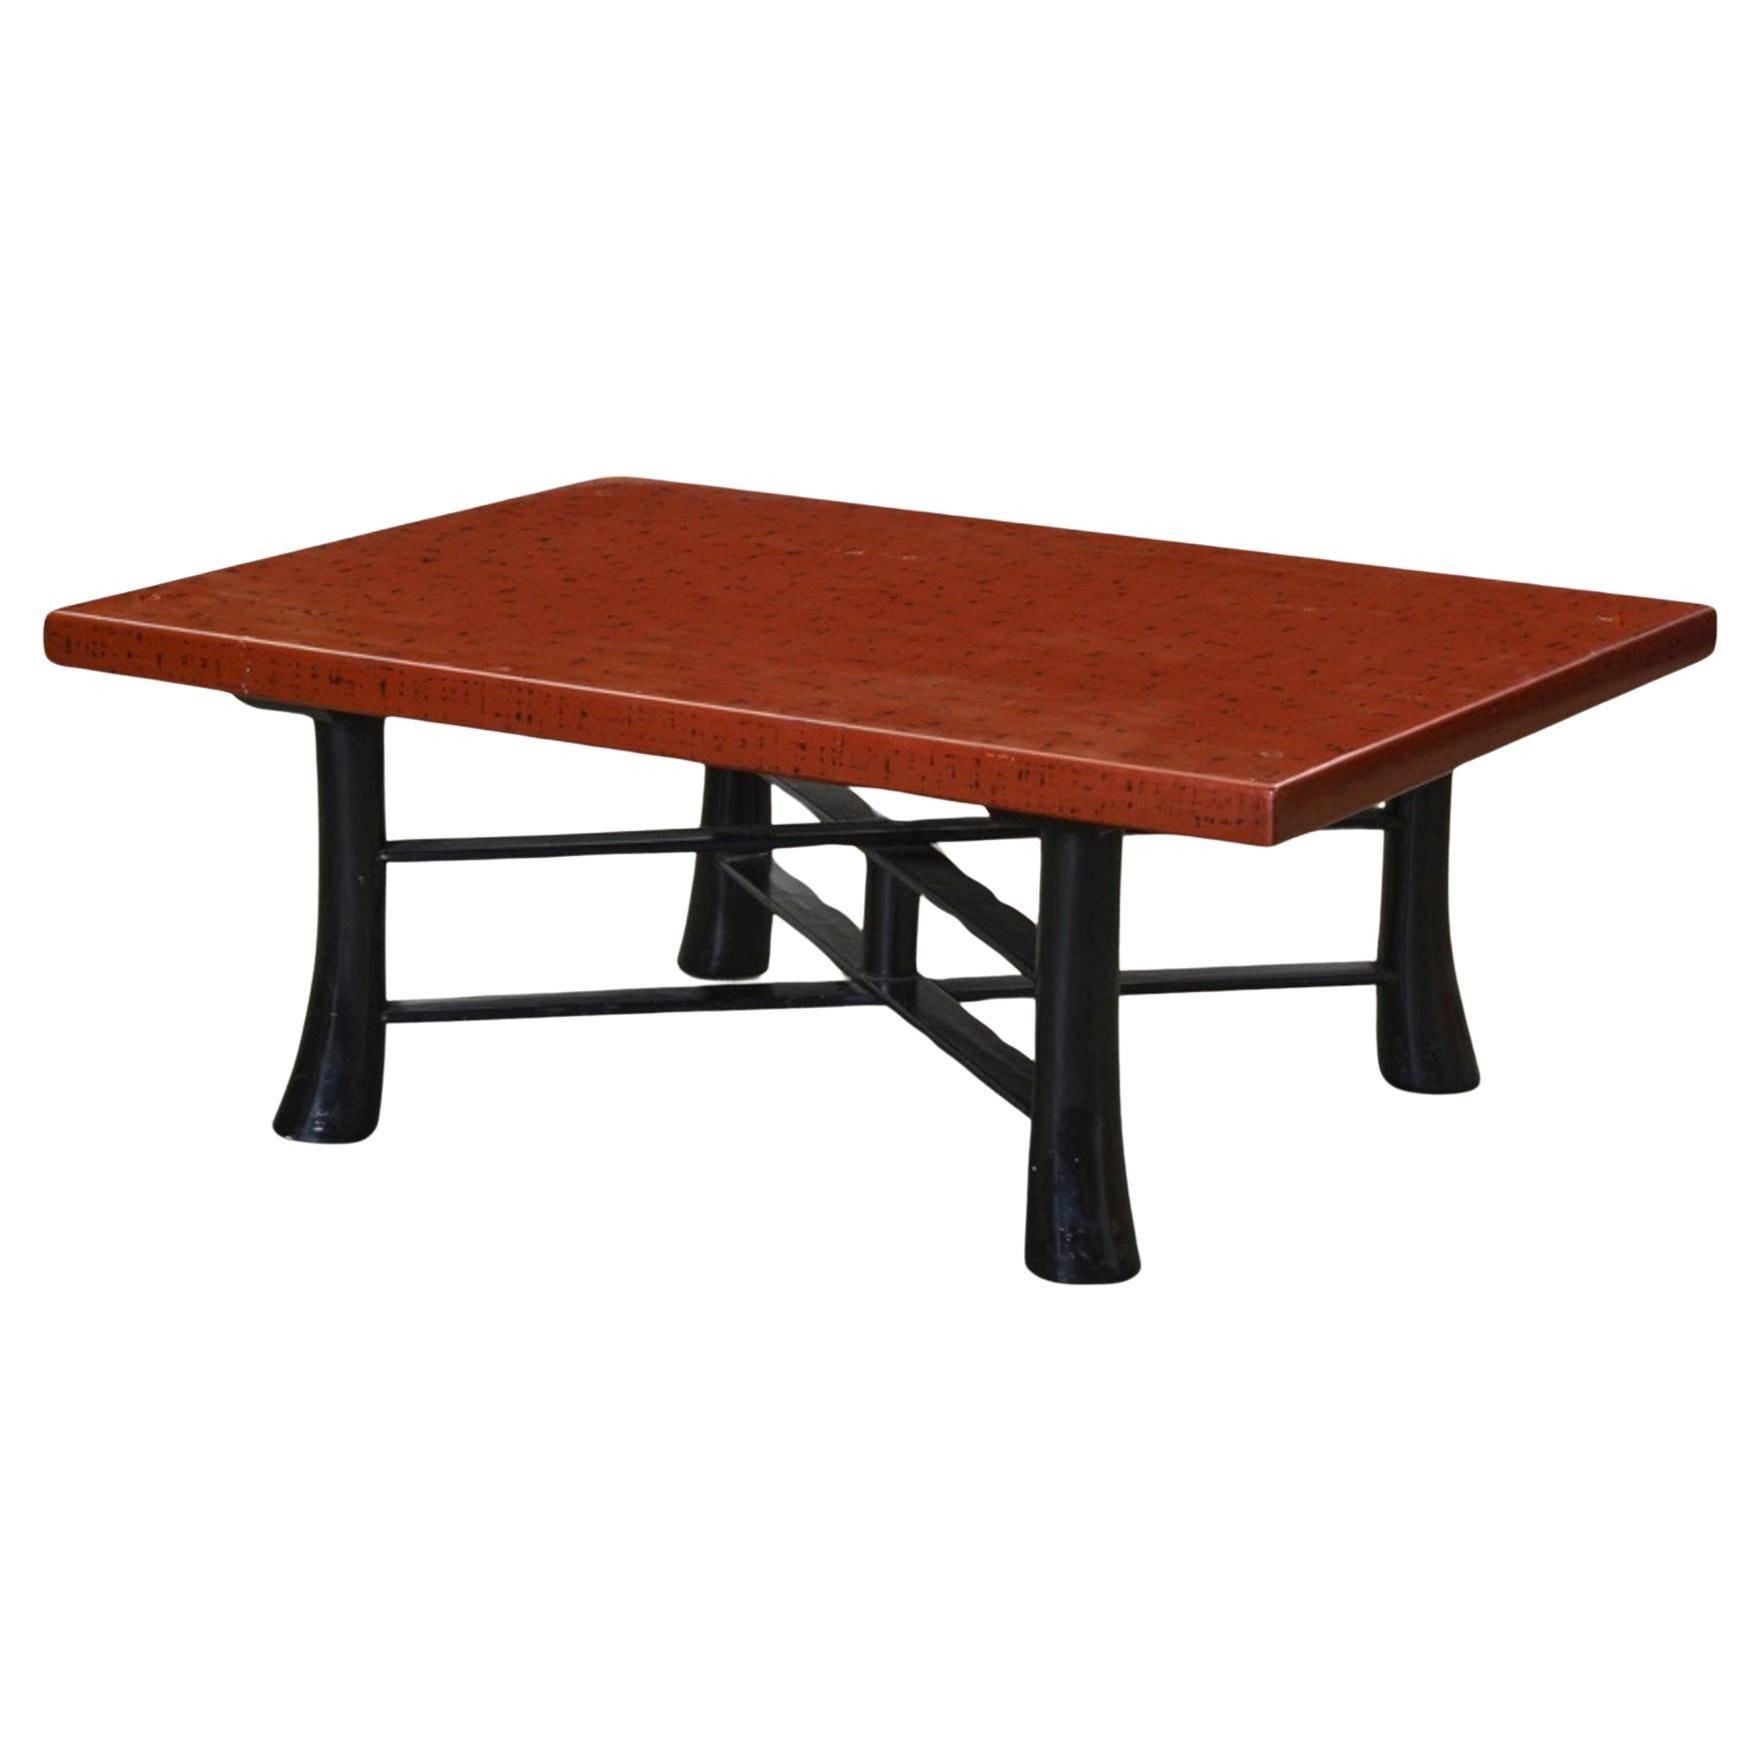 Japanese Negoro Lacquer Coffee Table